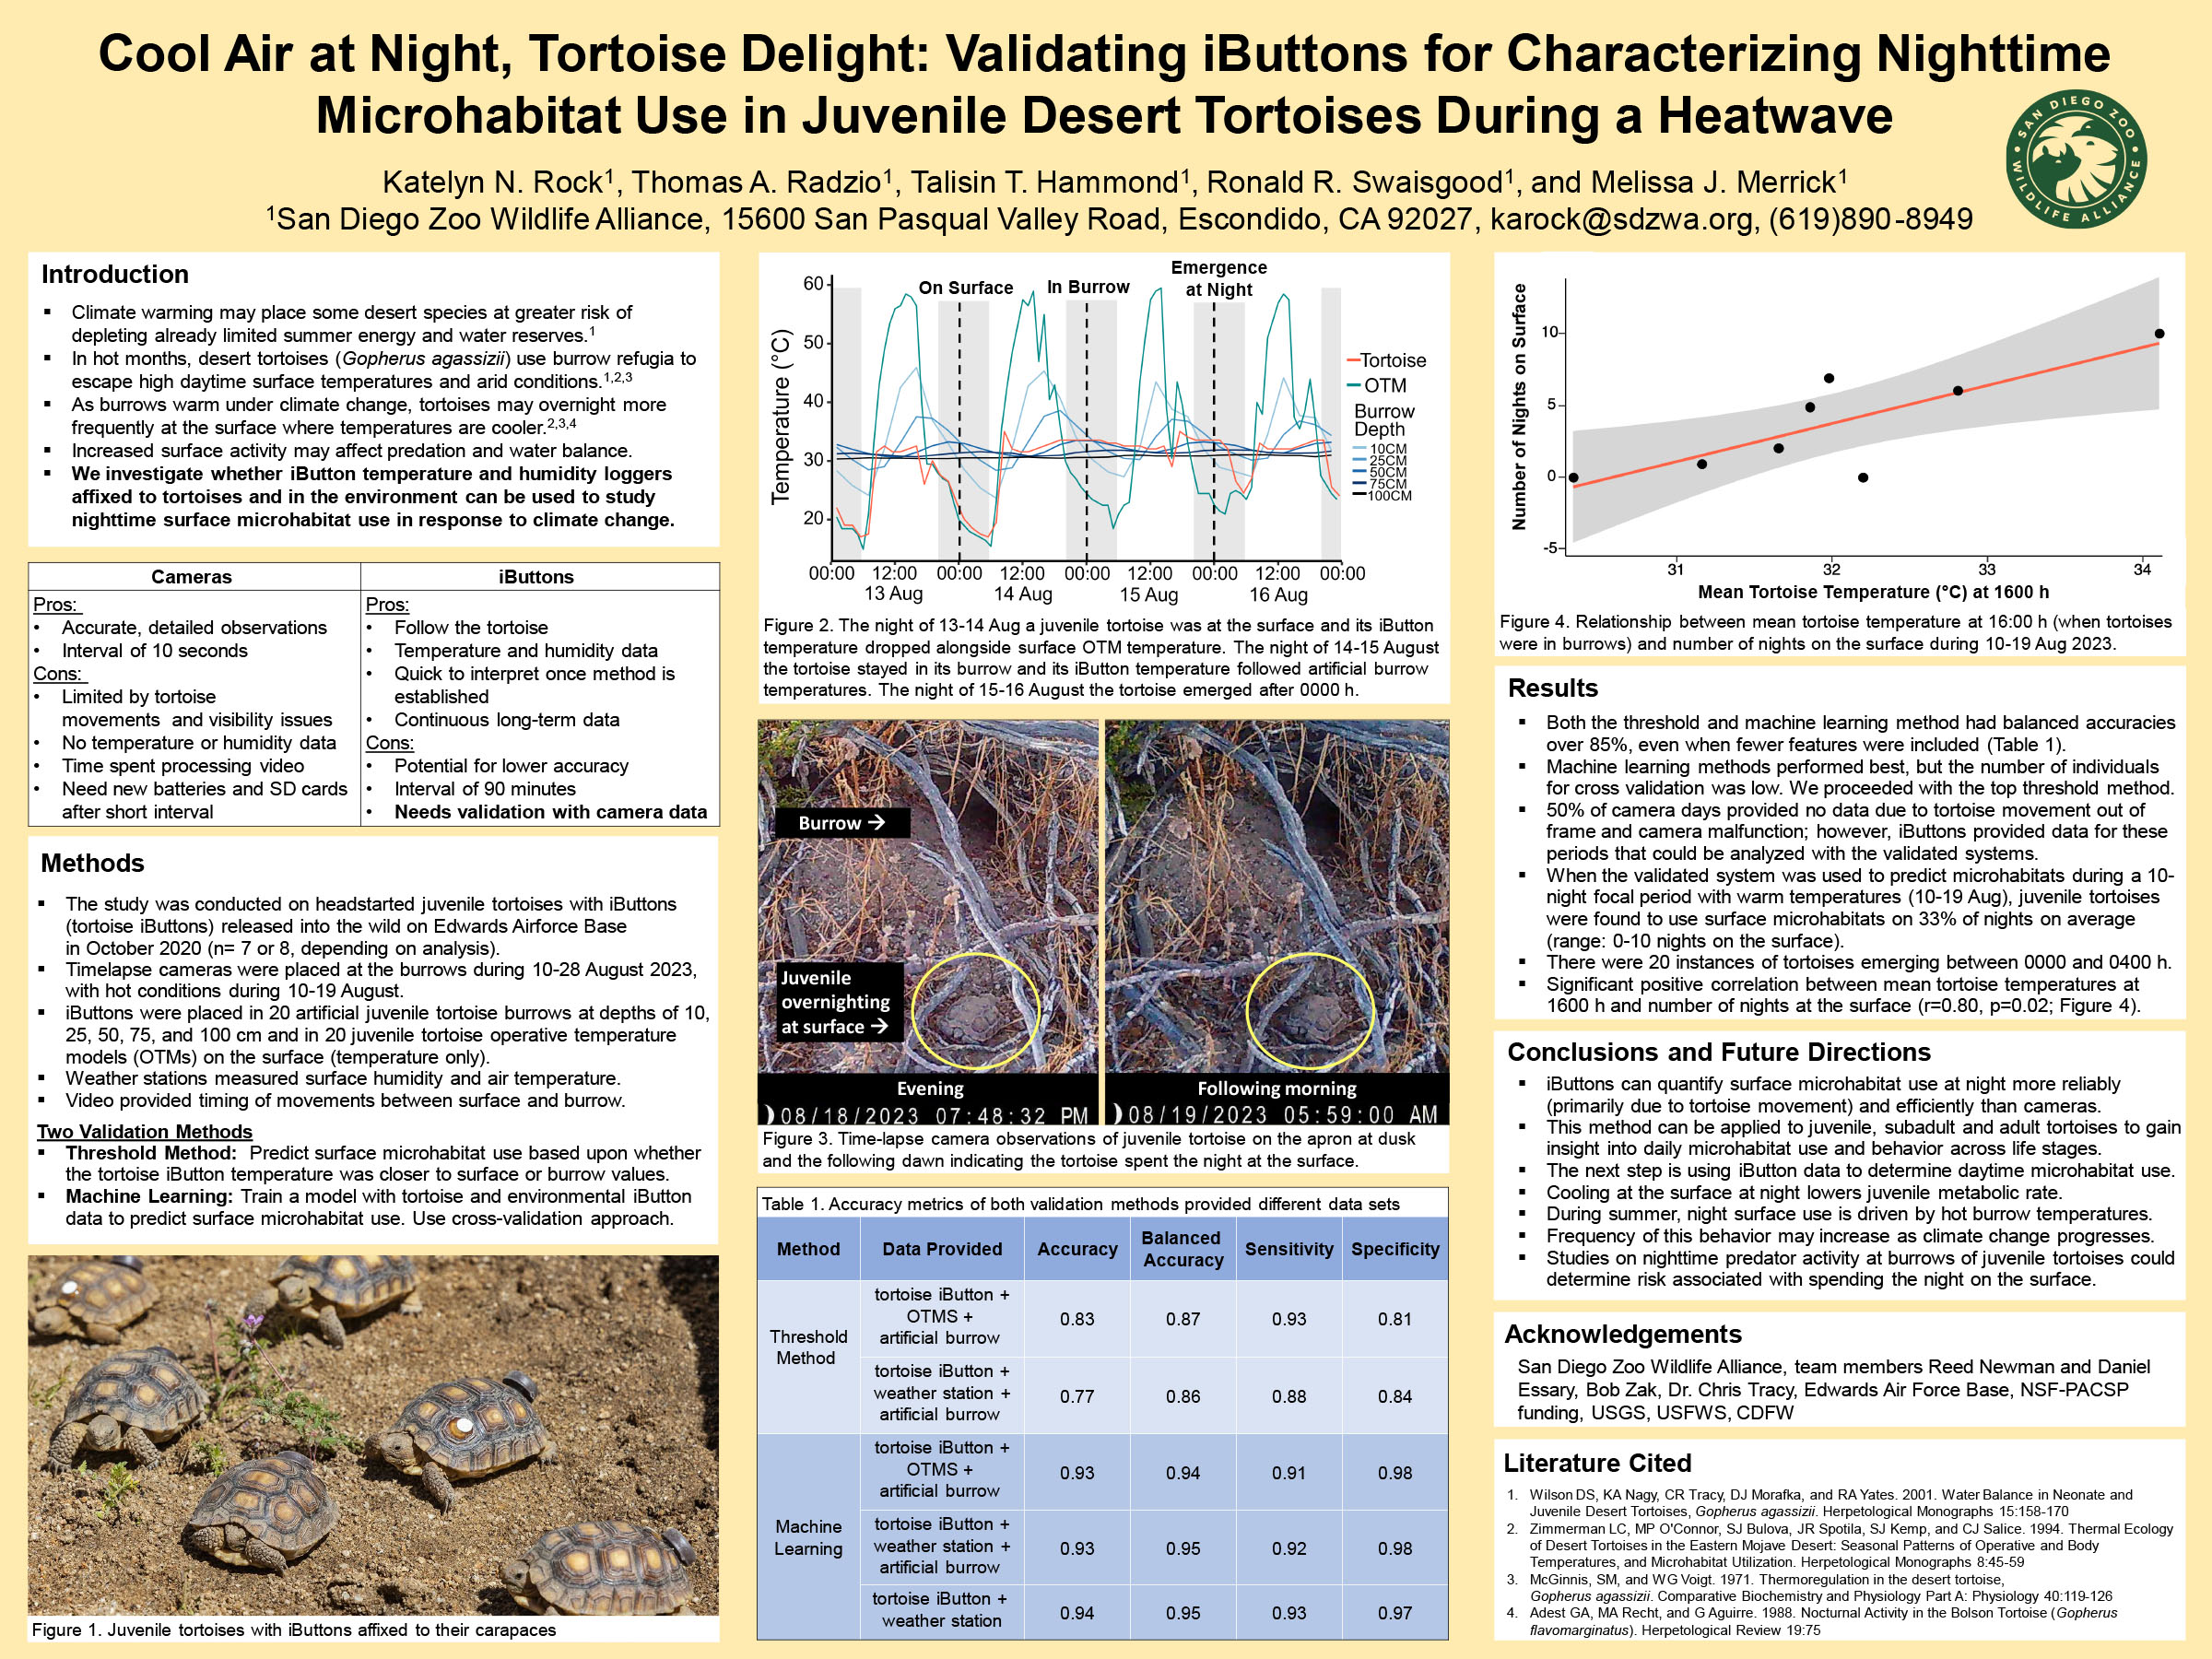 Cool Air at Night, Tortoise Delight: Validating Ibuttons for Characterizing Nighttime Microhabitat Use in Juvenile Desert Tortoises (Gopherus Agassizii) During a Heatwave